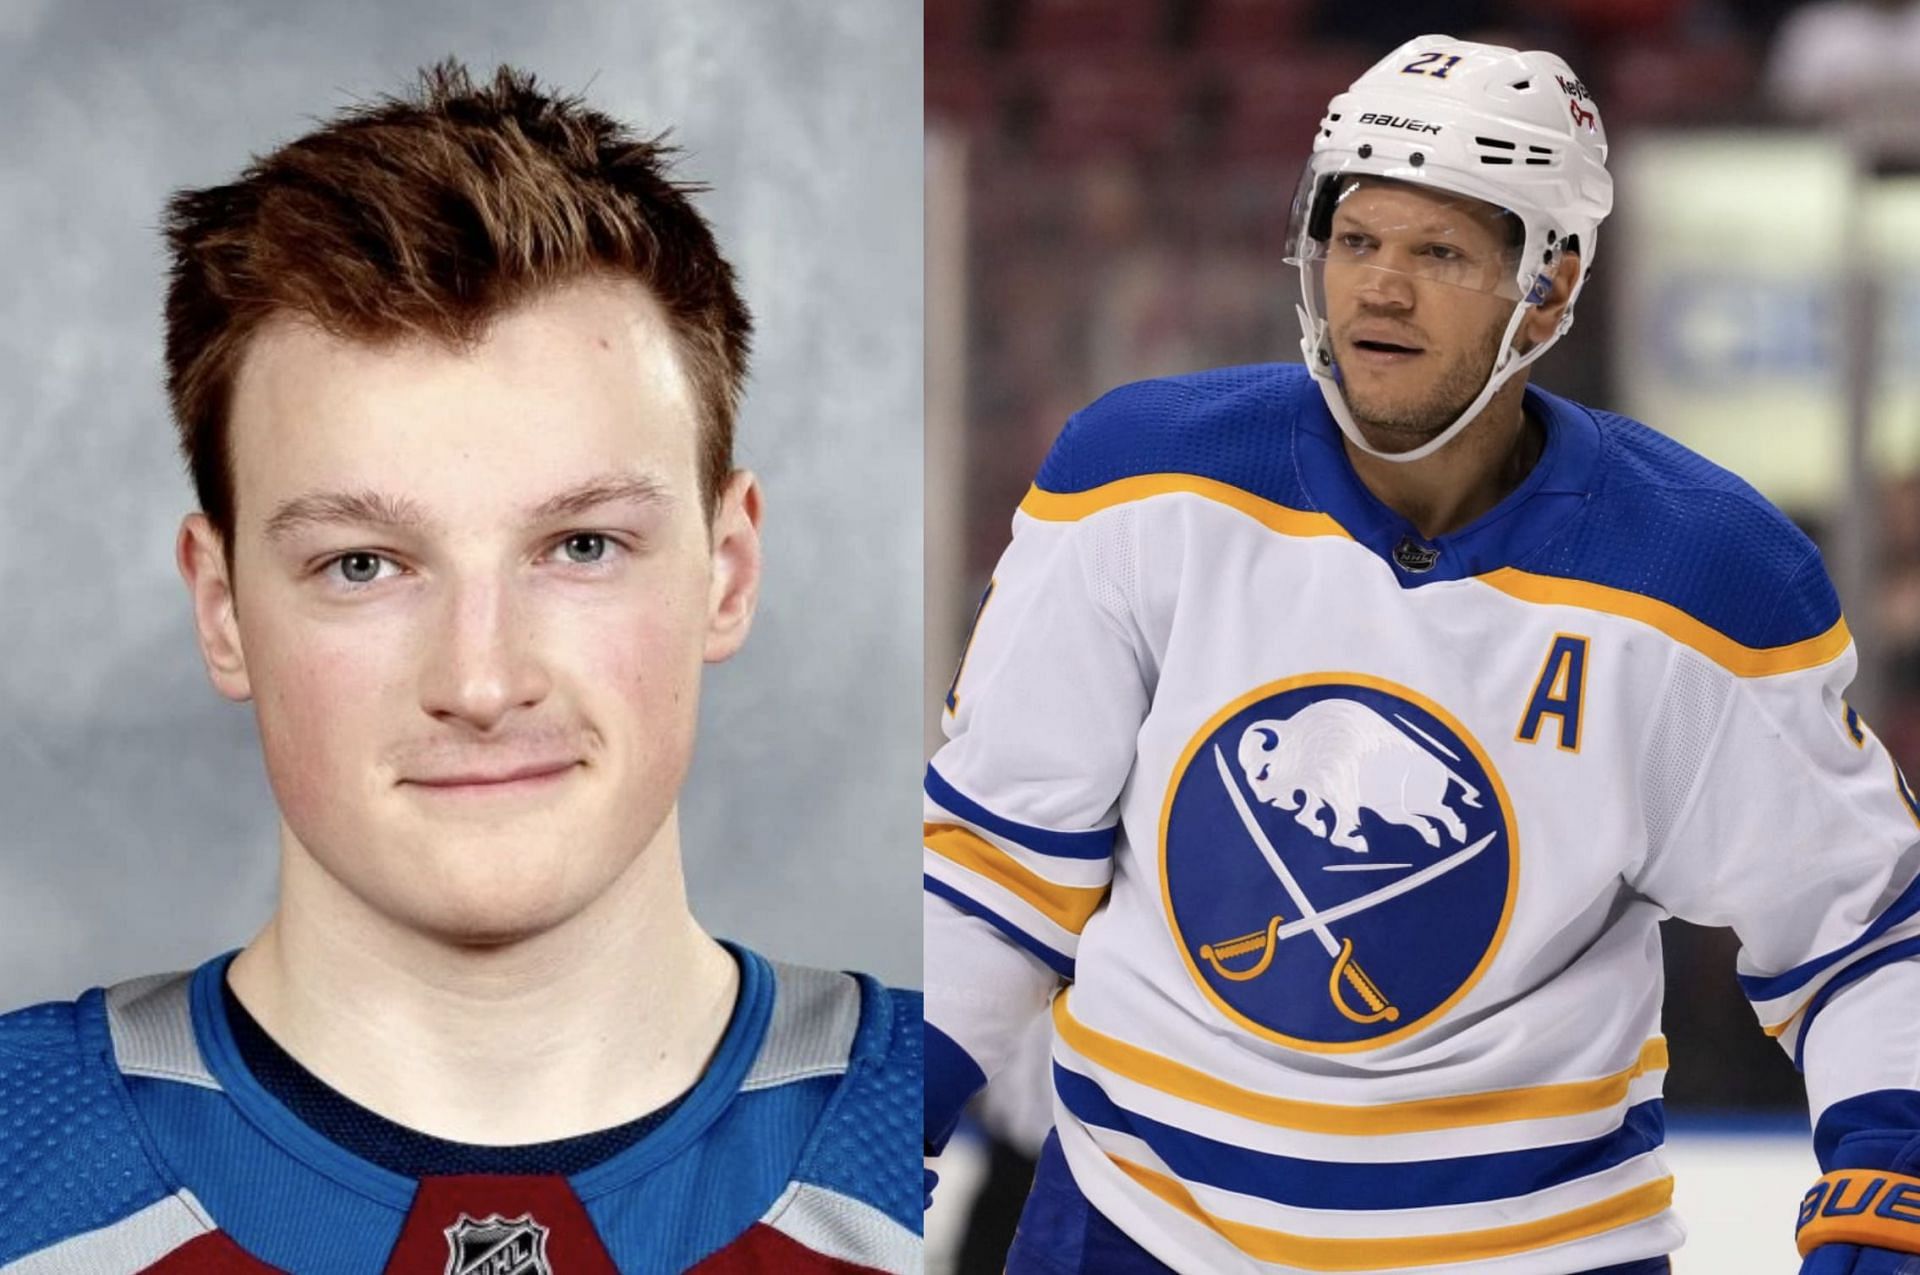 Kyle Okposo clears the air after Cale Makar hit in Sabres